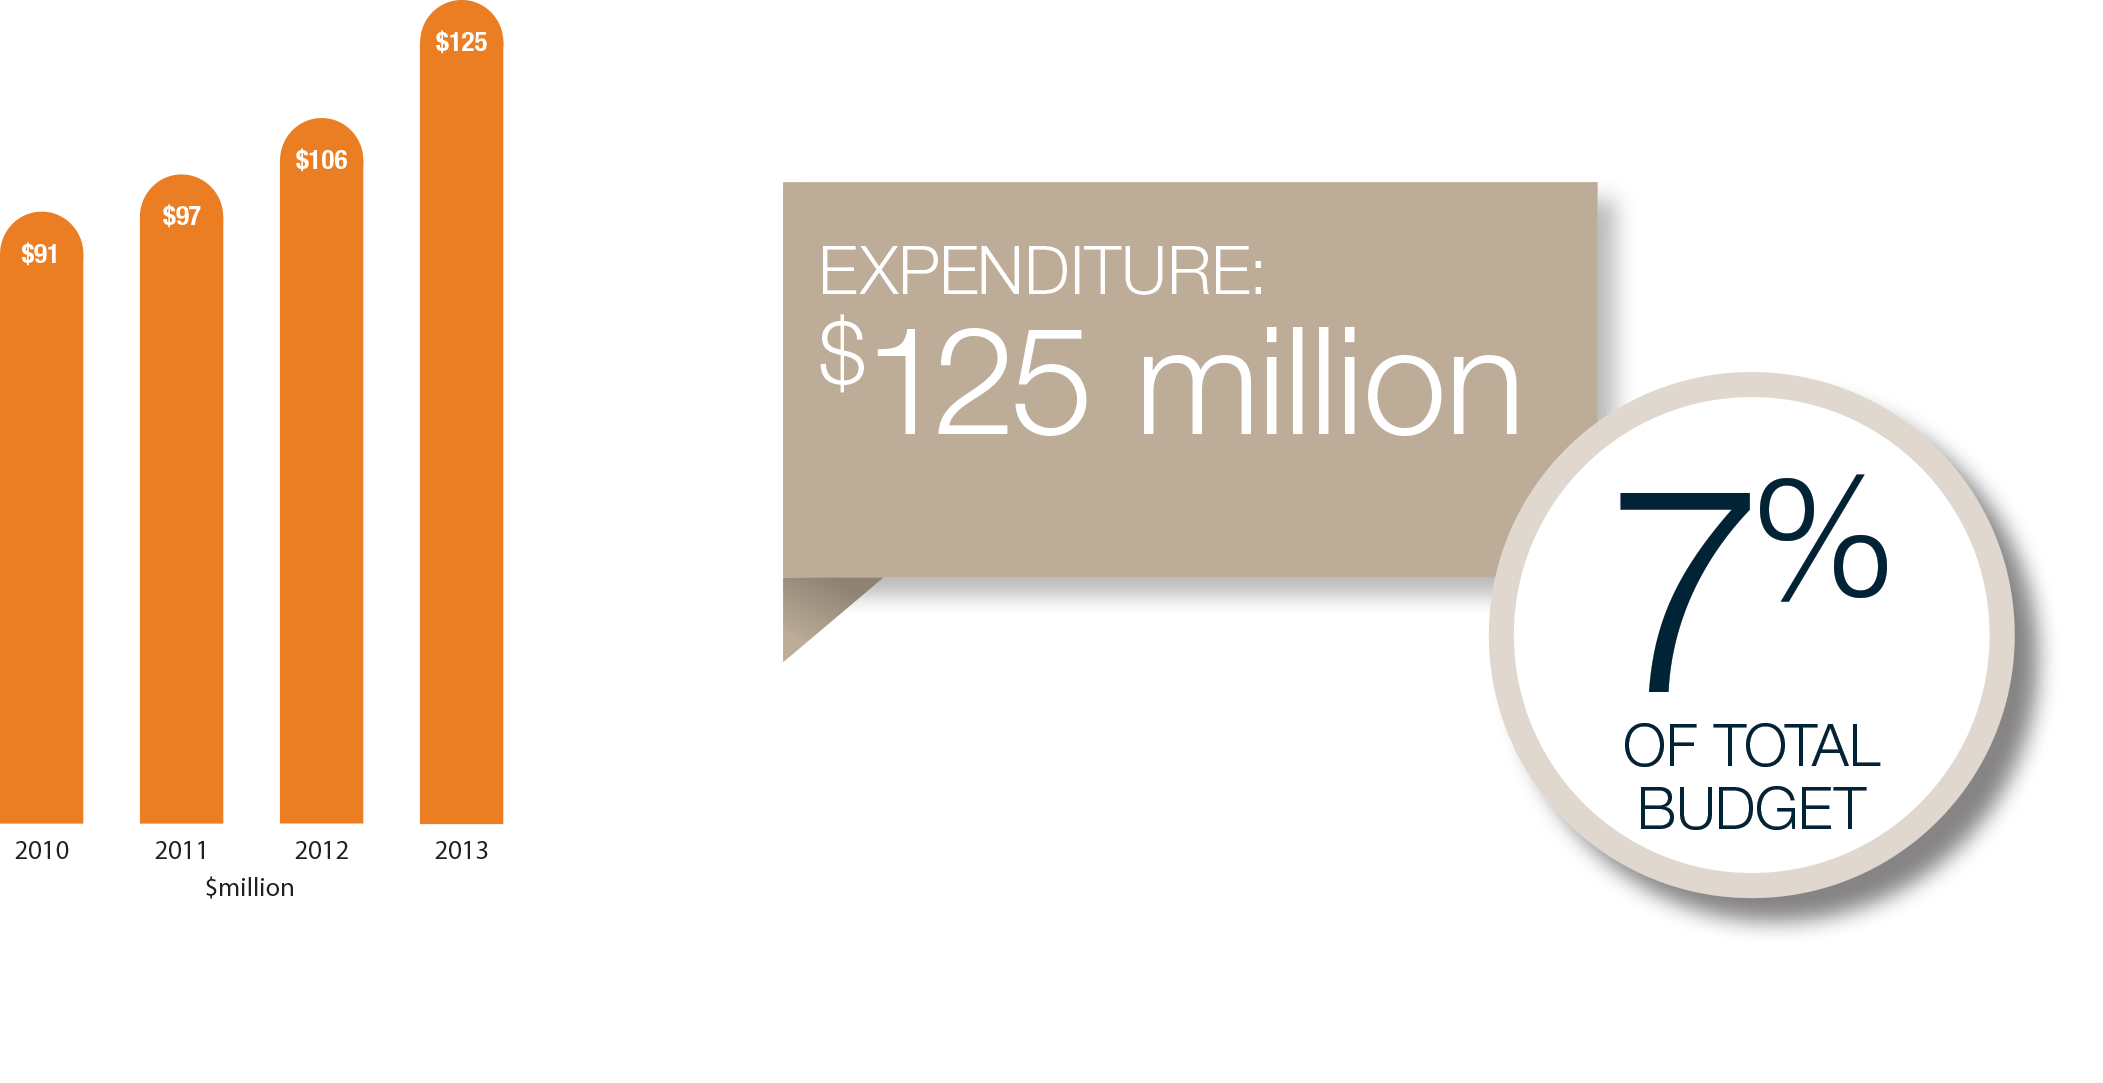 Expenditure in 2013 was $125 million or 7% of the total budget